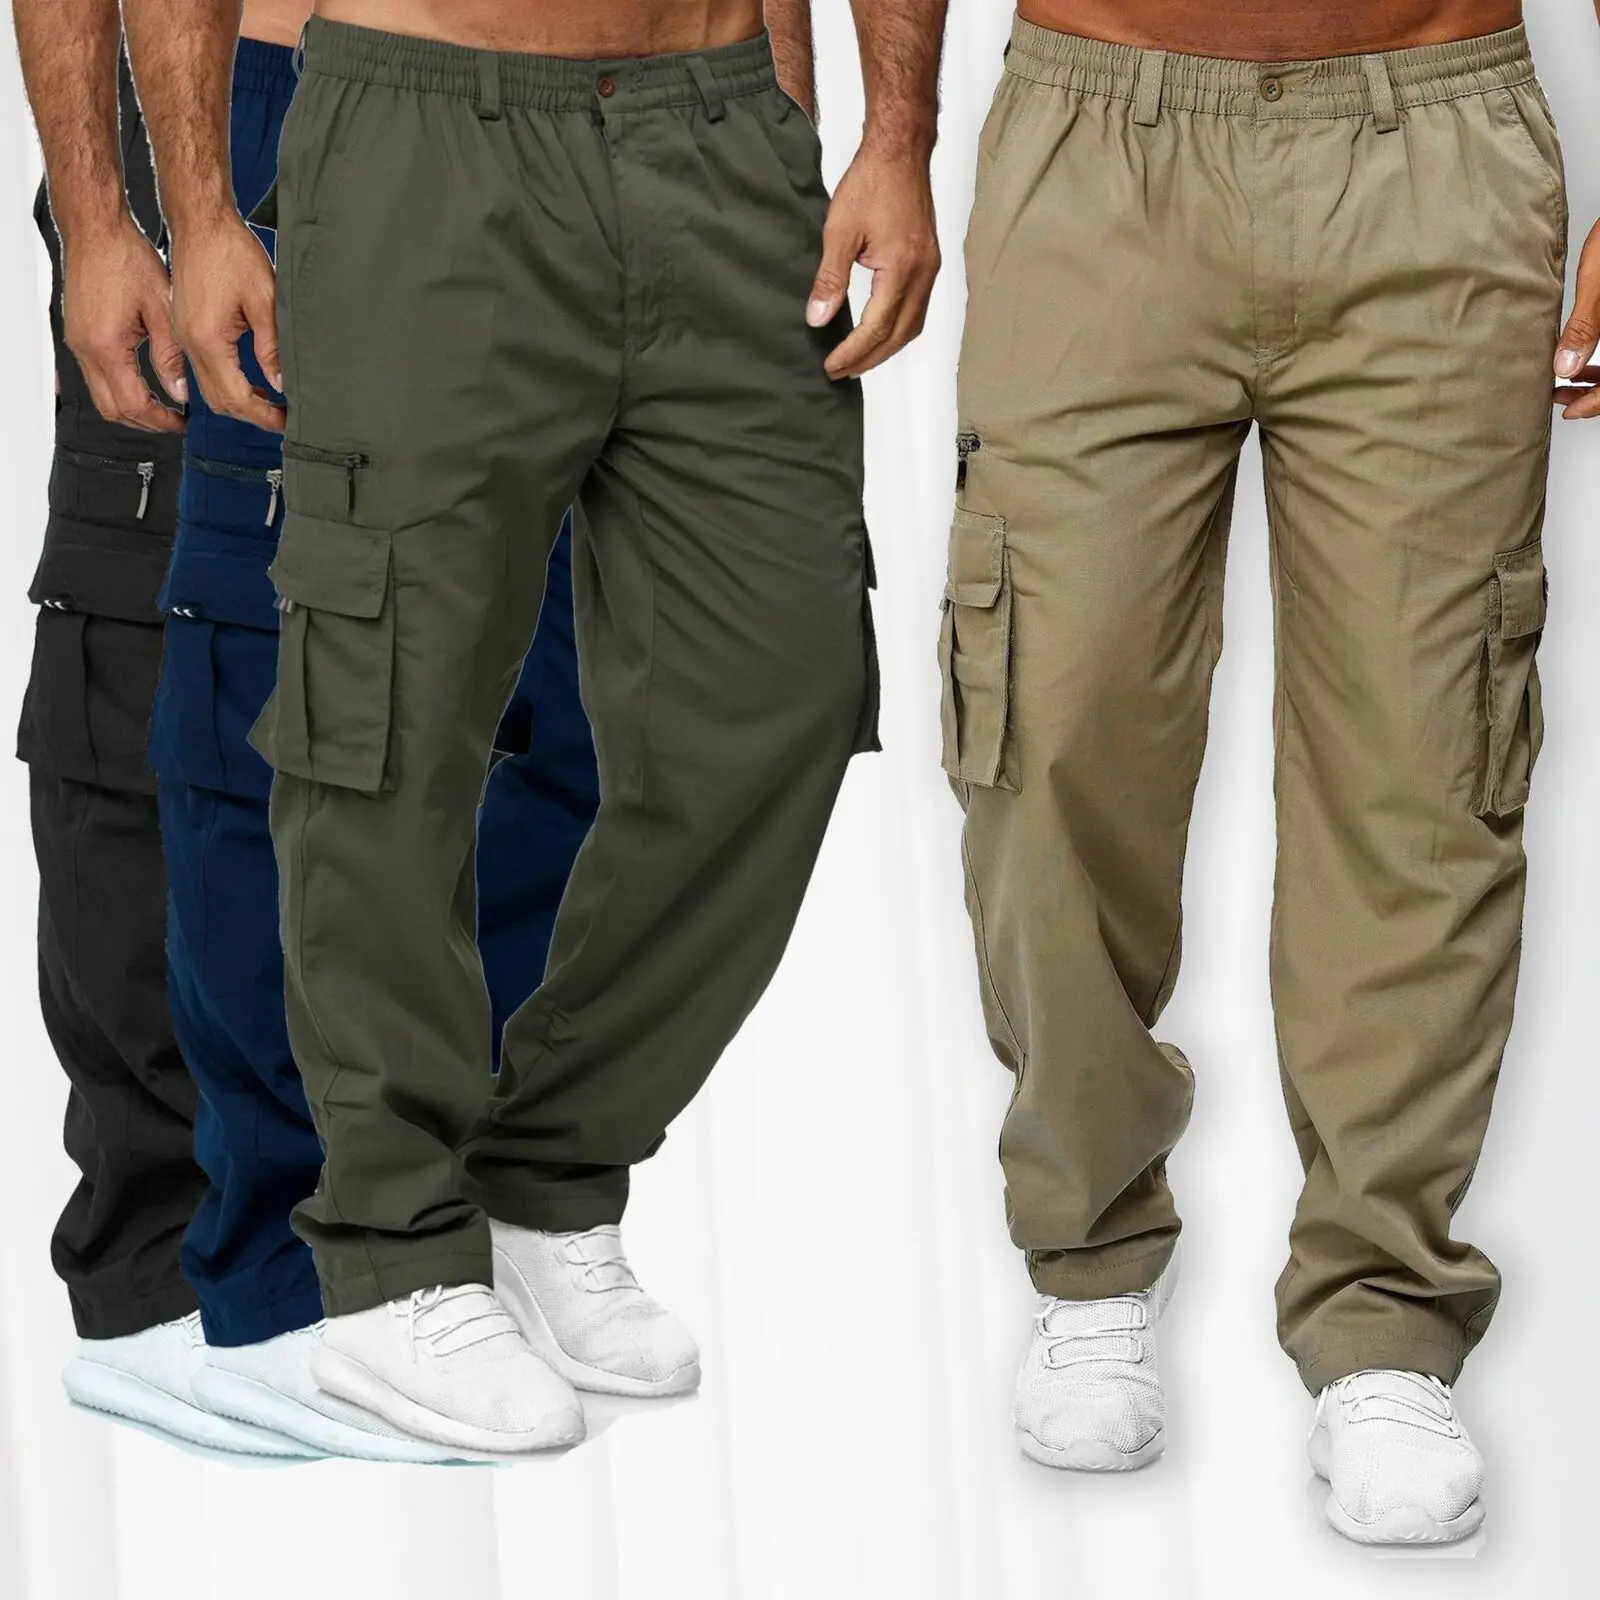 Buy Chef Work Pants Mens Loose Cotton Plus Size Pocket Lace Up Elastic  Waist Pants Trousers Overall Yellow at Amazon.in